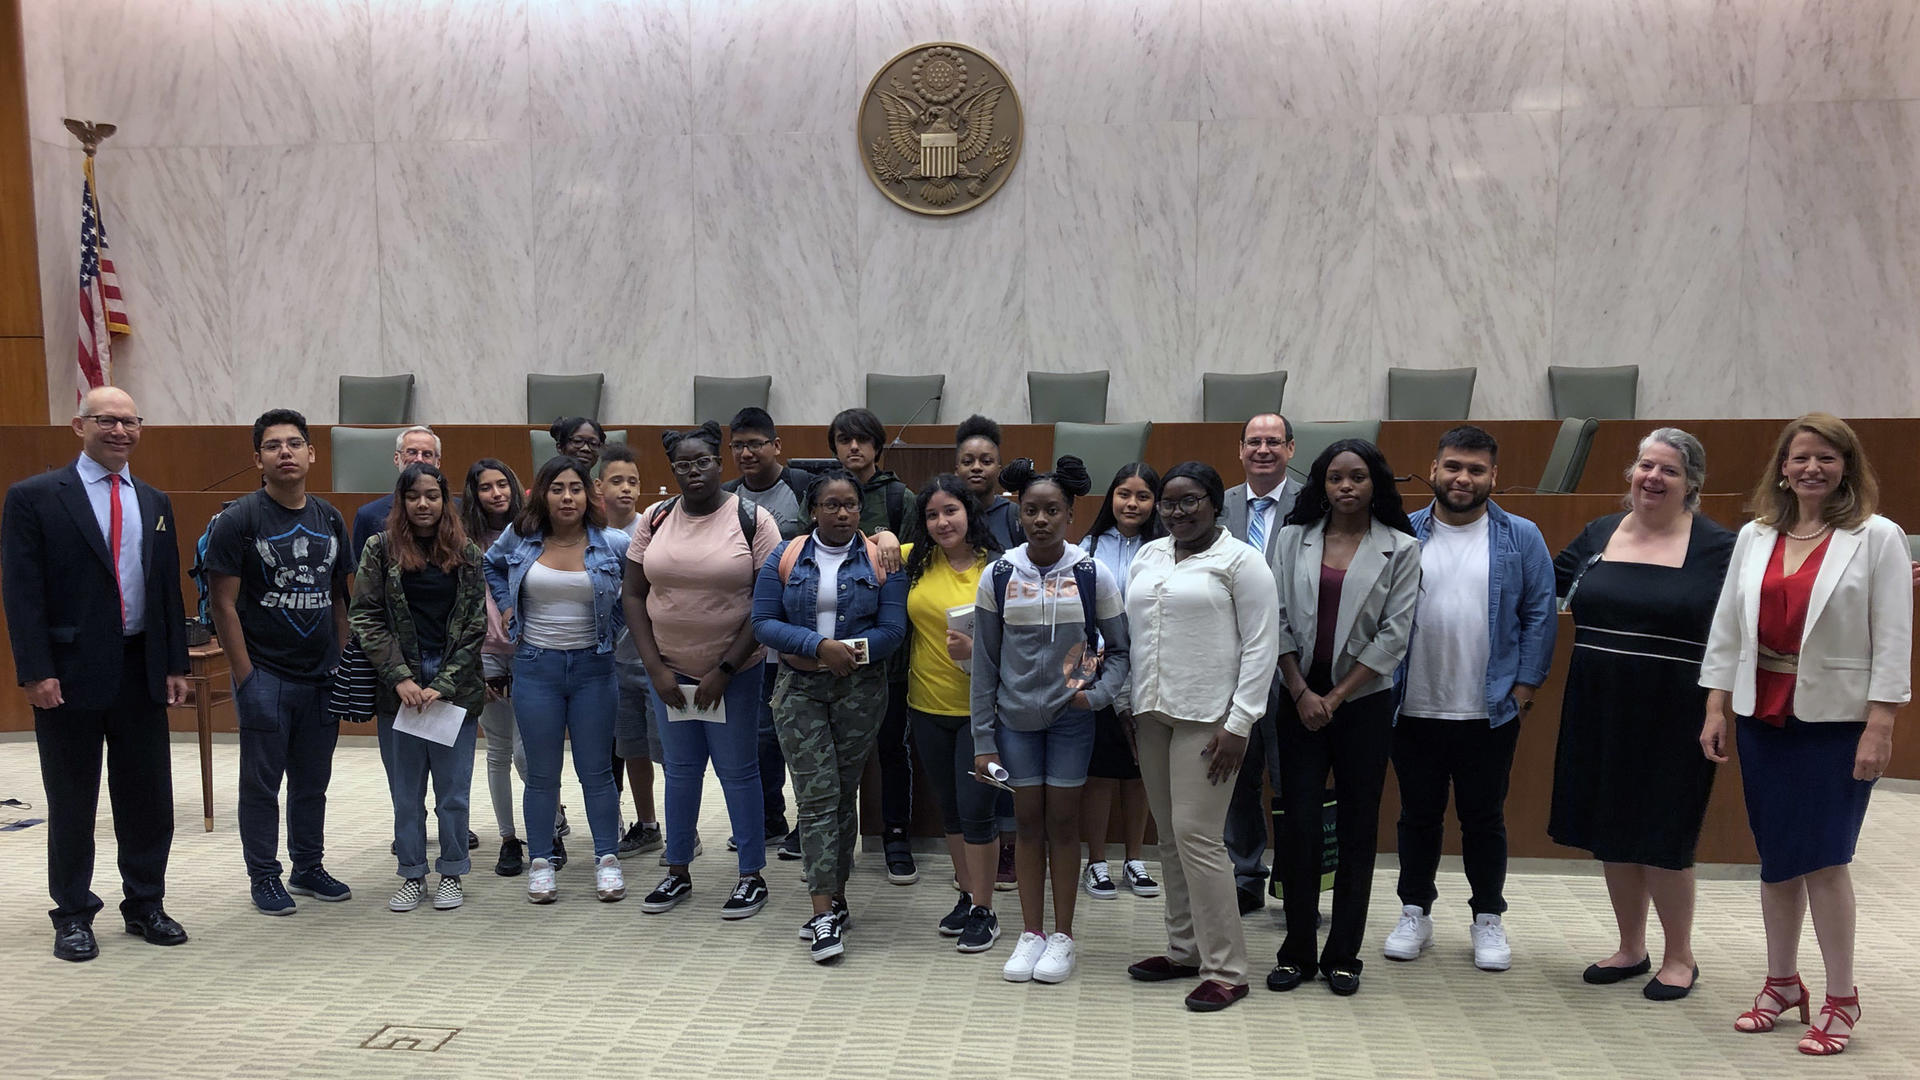 Students from H.S. 519 Cobble Hill School of American Studies flanked by jazz faculty member Ted Rosenthal and Lesley Rosenthal, Juilliard's chief operating officer, and Magistrate Judge Vera Scanlon at a Constitution Day naturalization ceremony